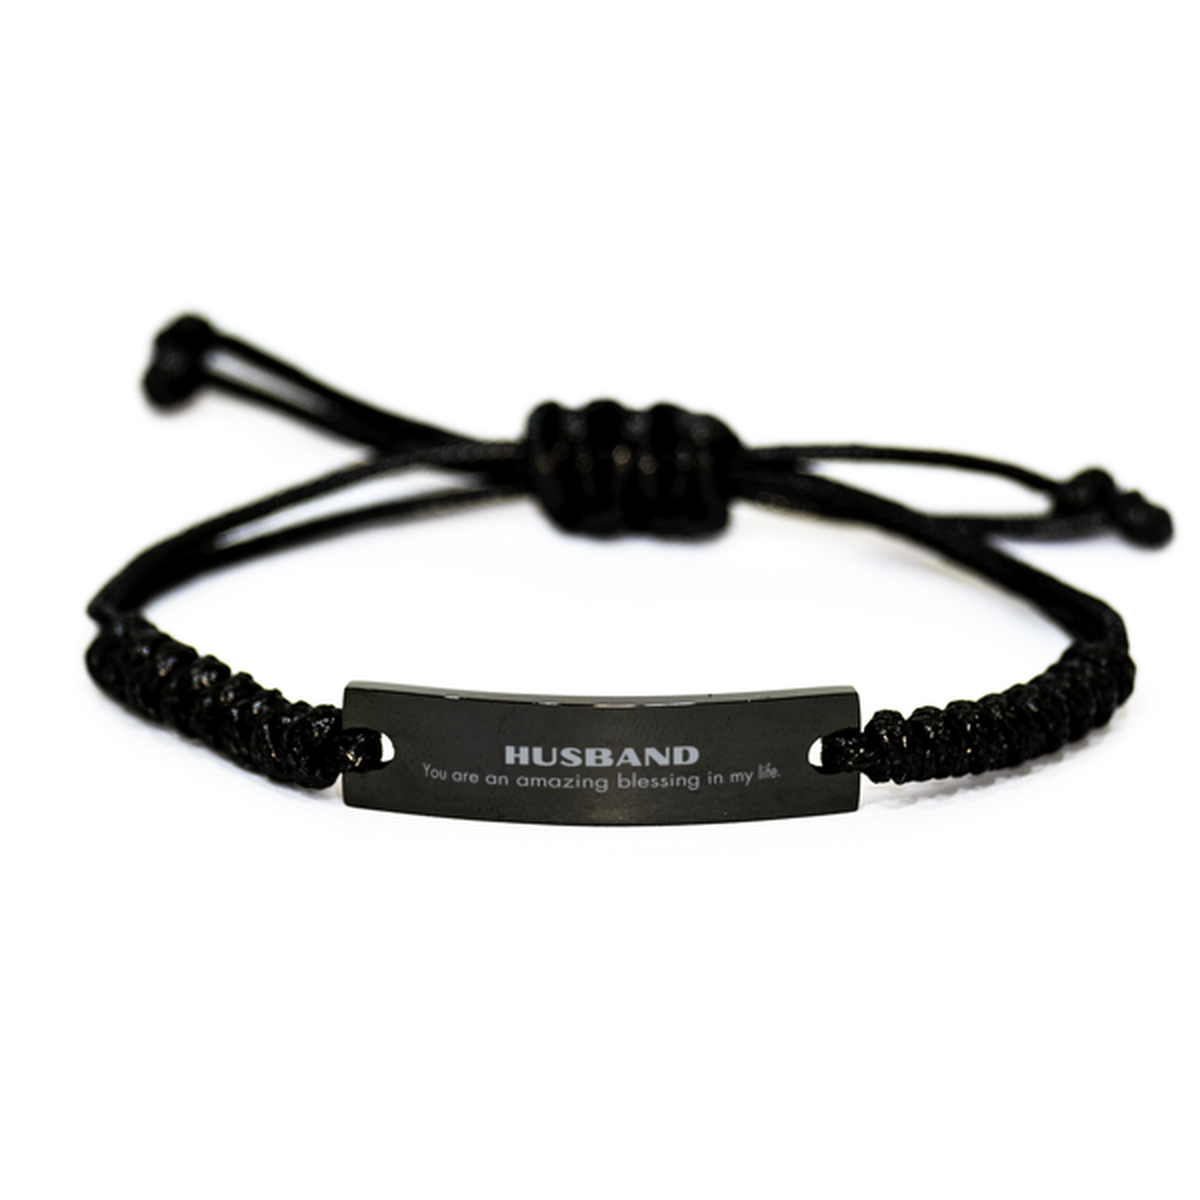 Husband Black Rope Bracelet, You are an amazing blessing in my life, Thank You Gifts For Husband, Inspirational Birthday Christmas Unique Gifts For Husband